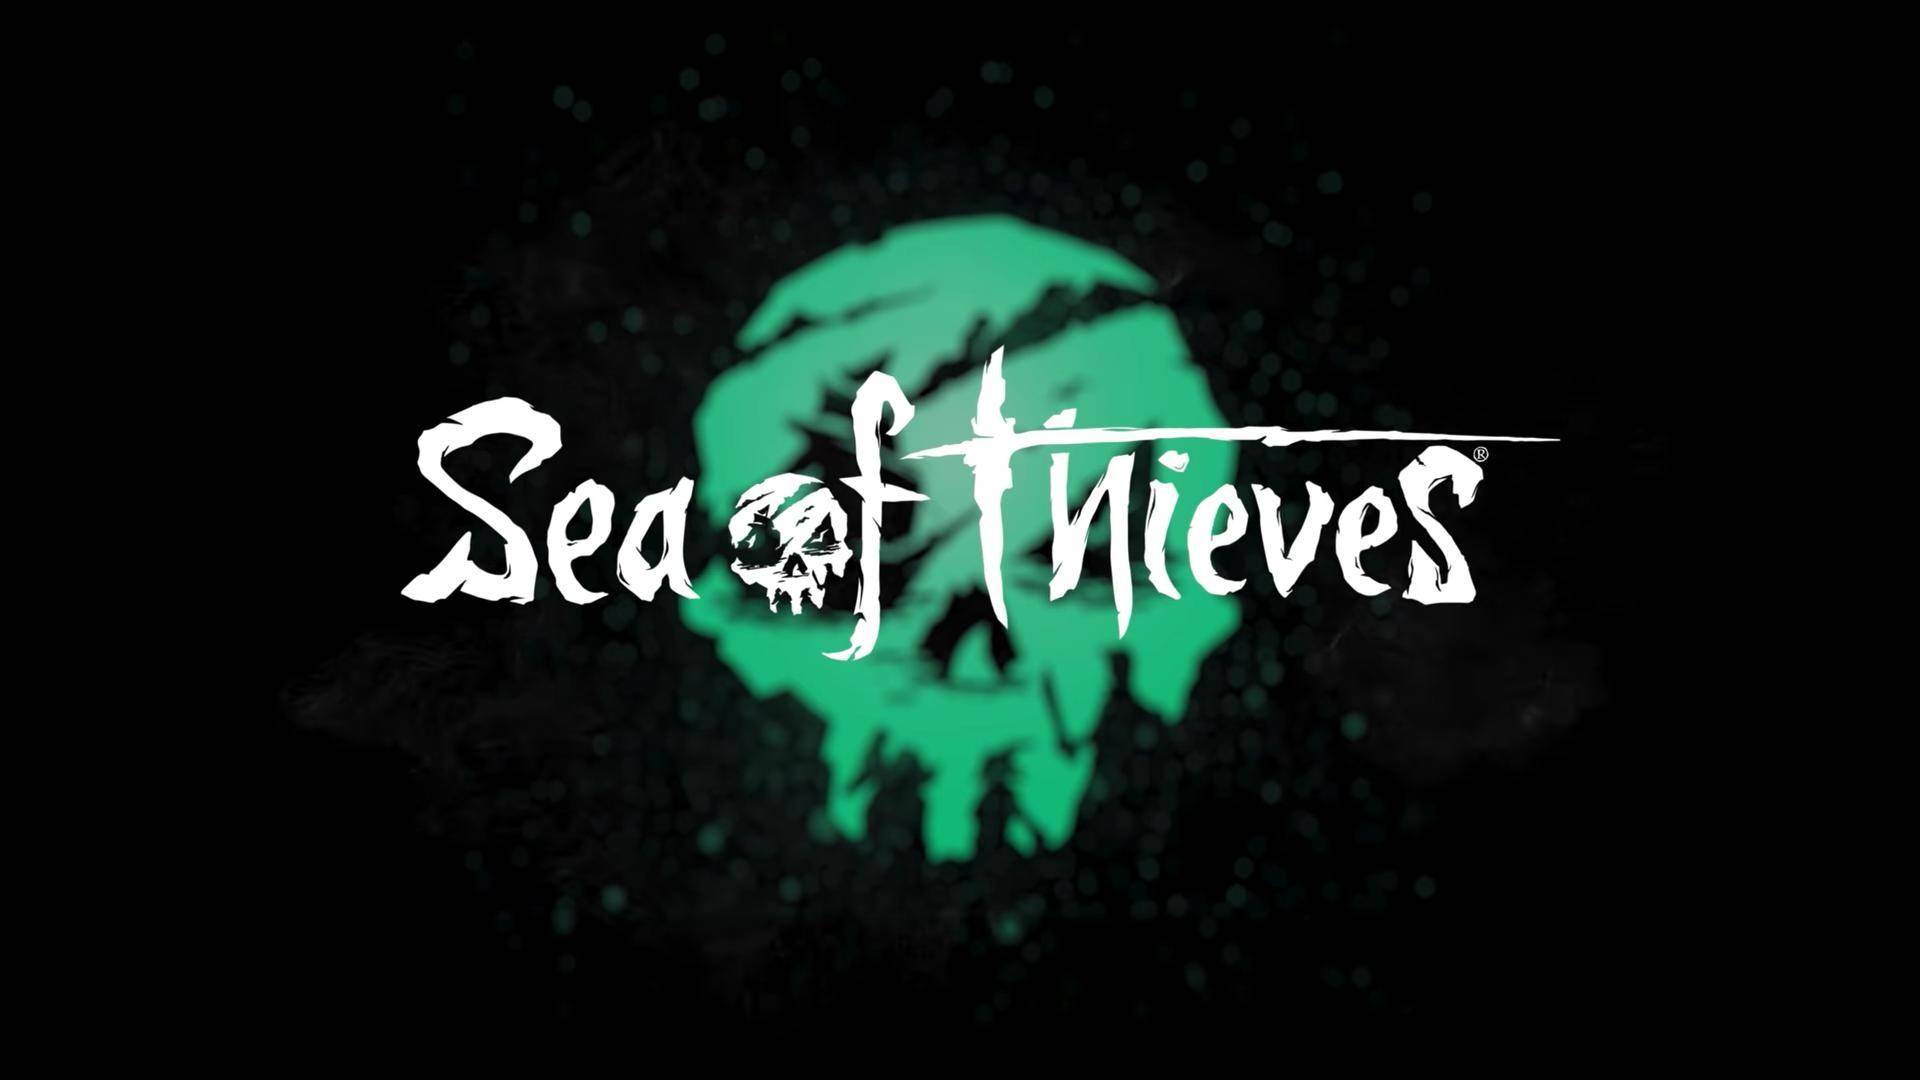 Sea Of Thieves added to our database!